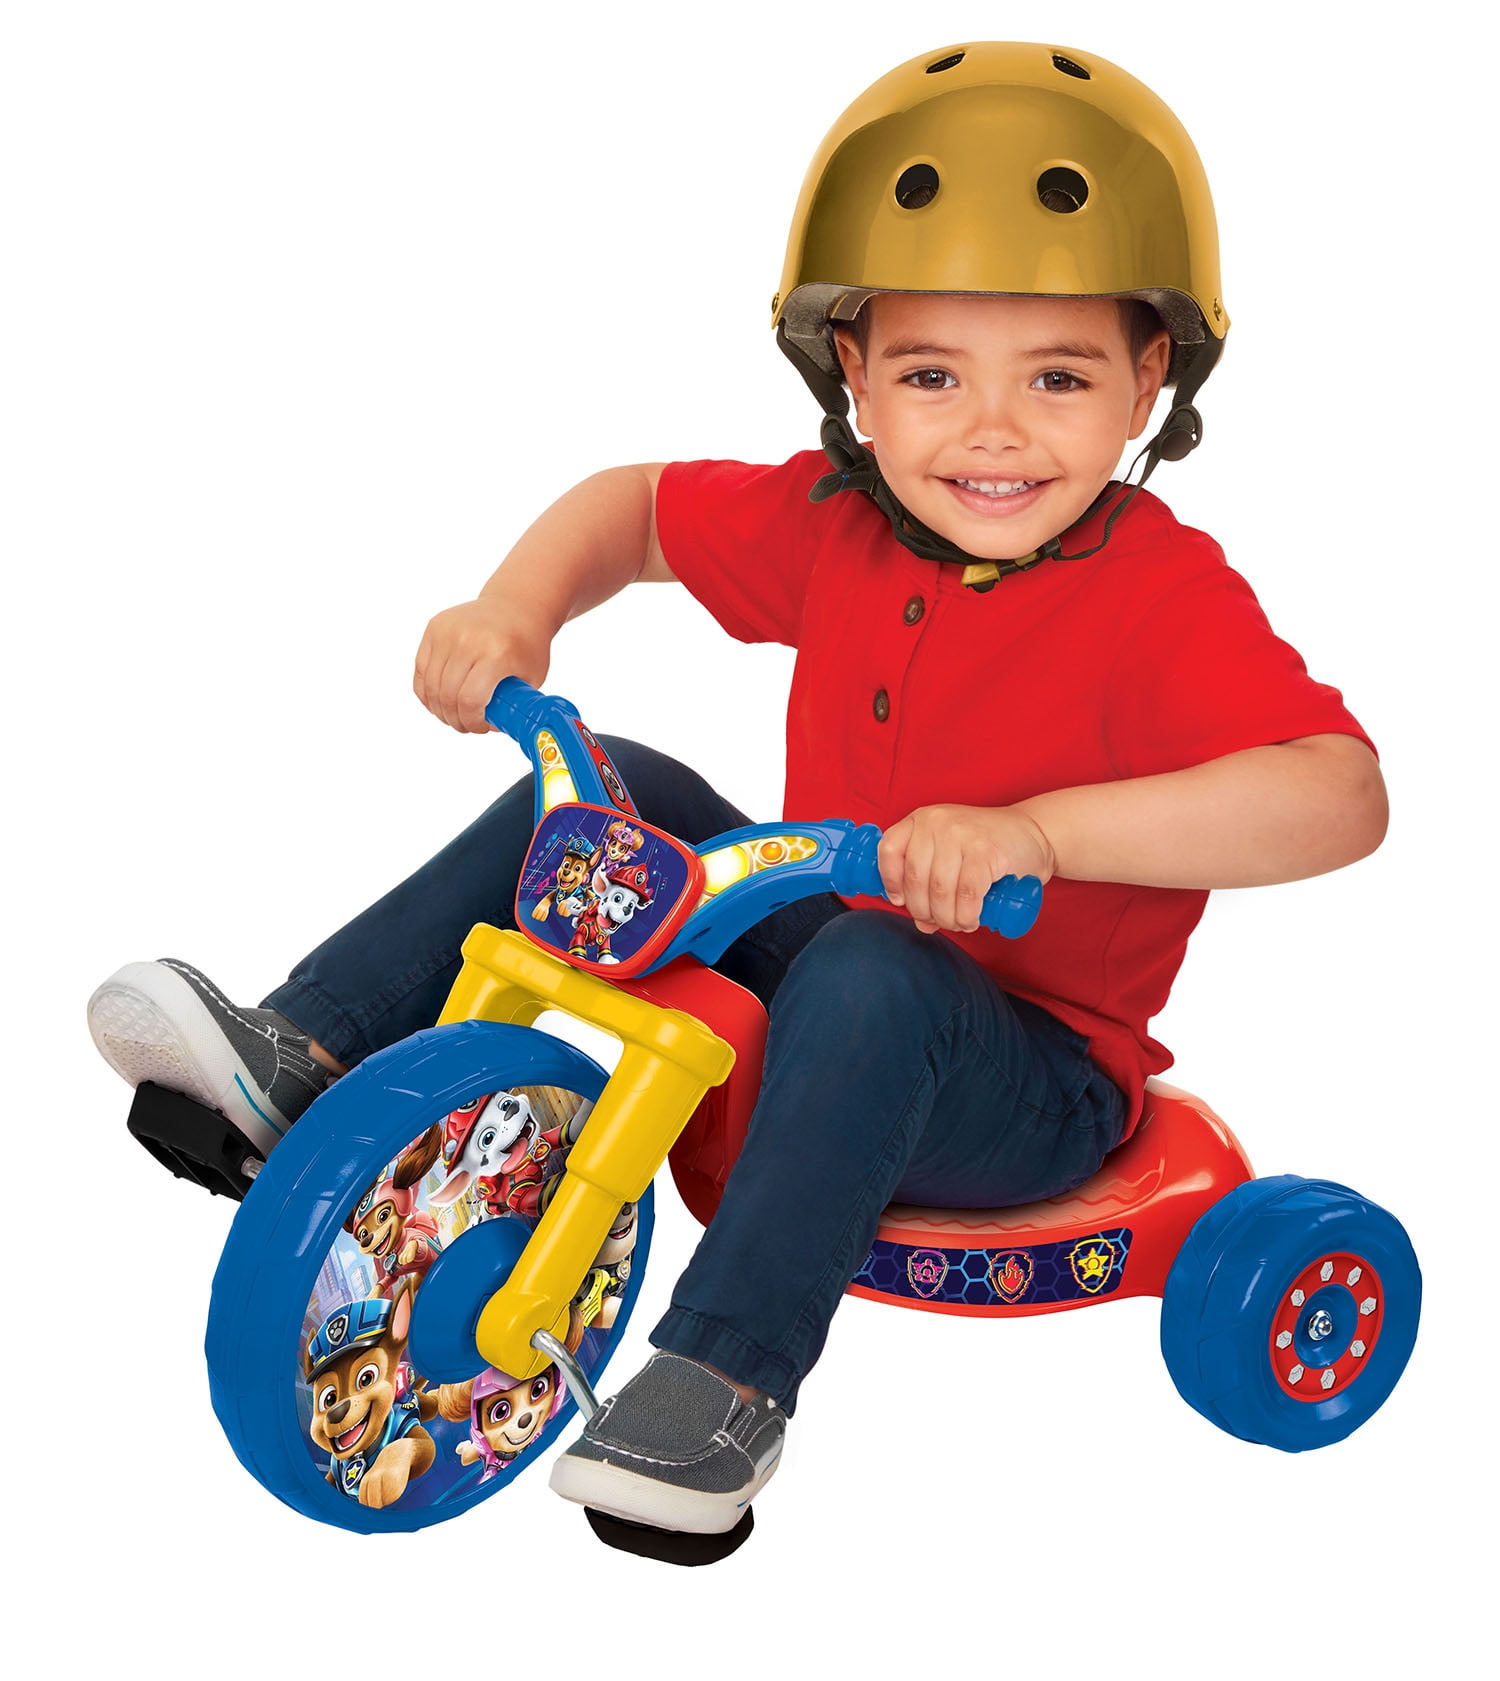 Paw Patrol Toddler And Kids Bike Helmet Riders 3-8 Years Old Lower Molded Shell 